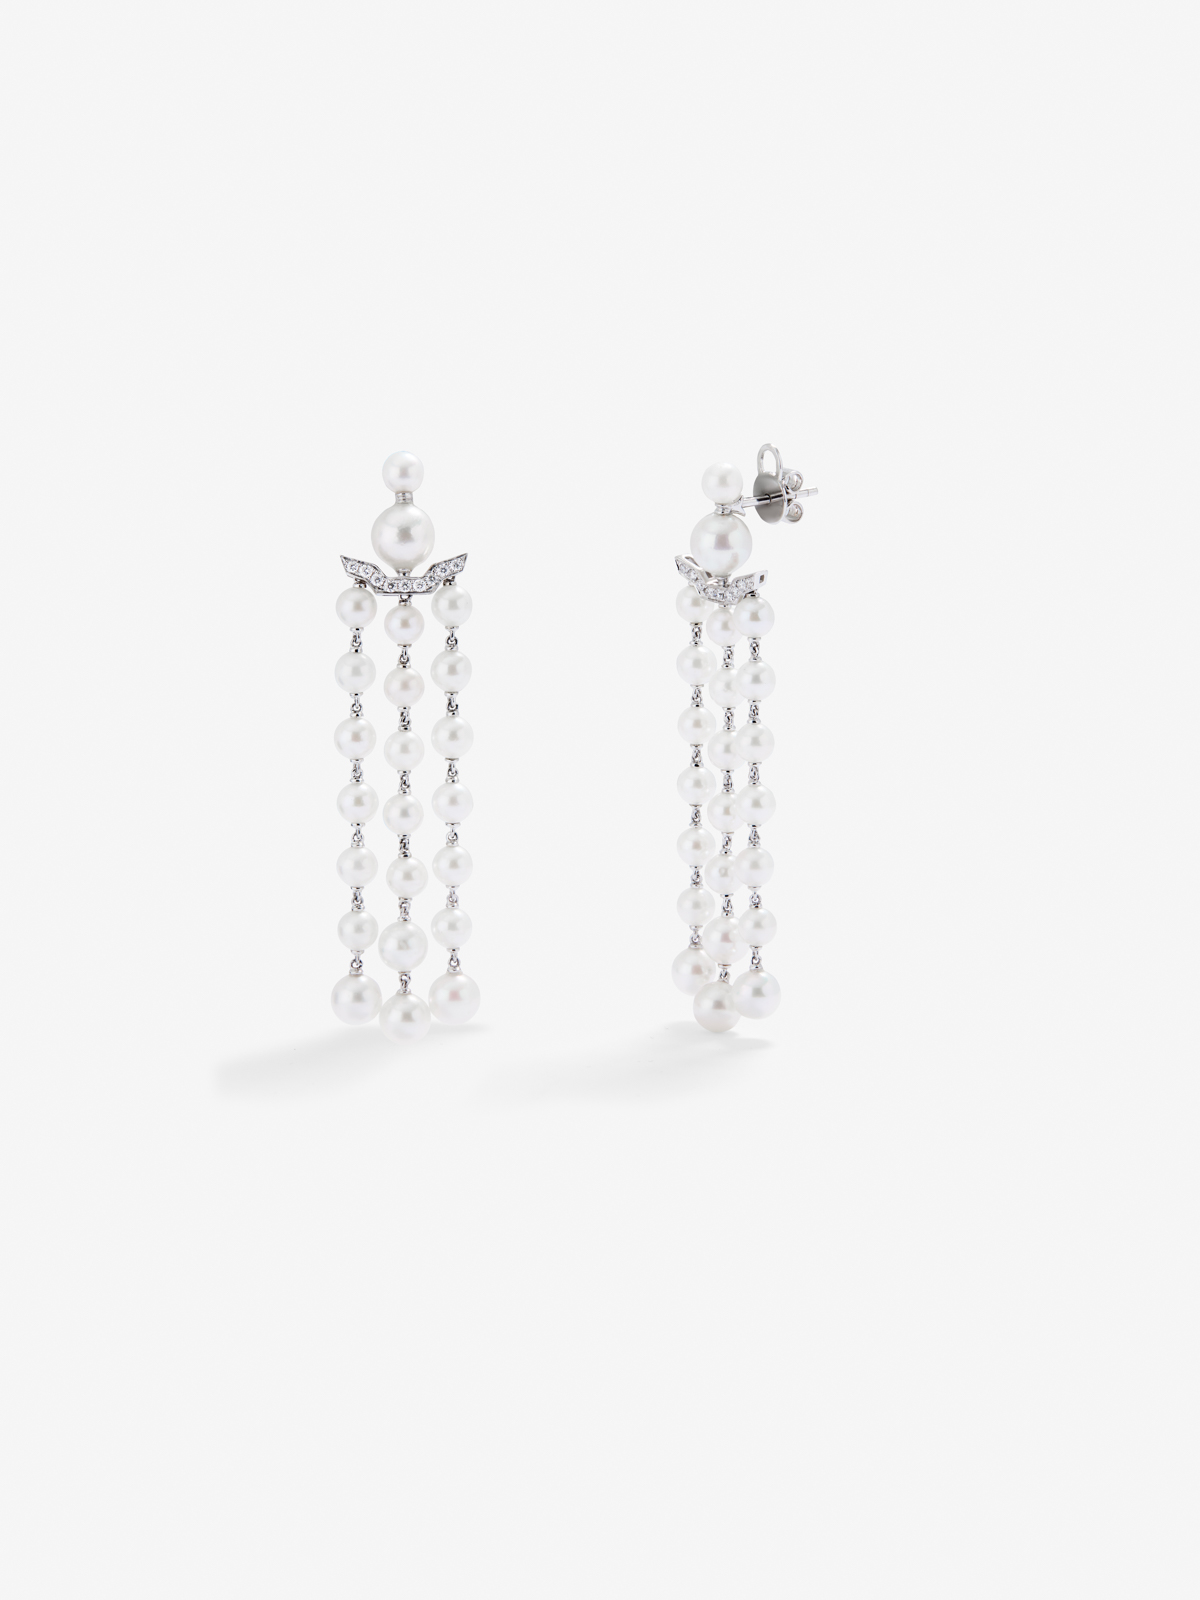 18k white gold earrings with diamonds and pearls